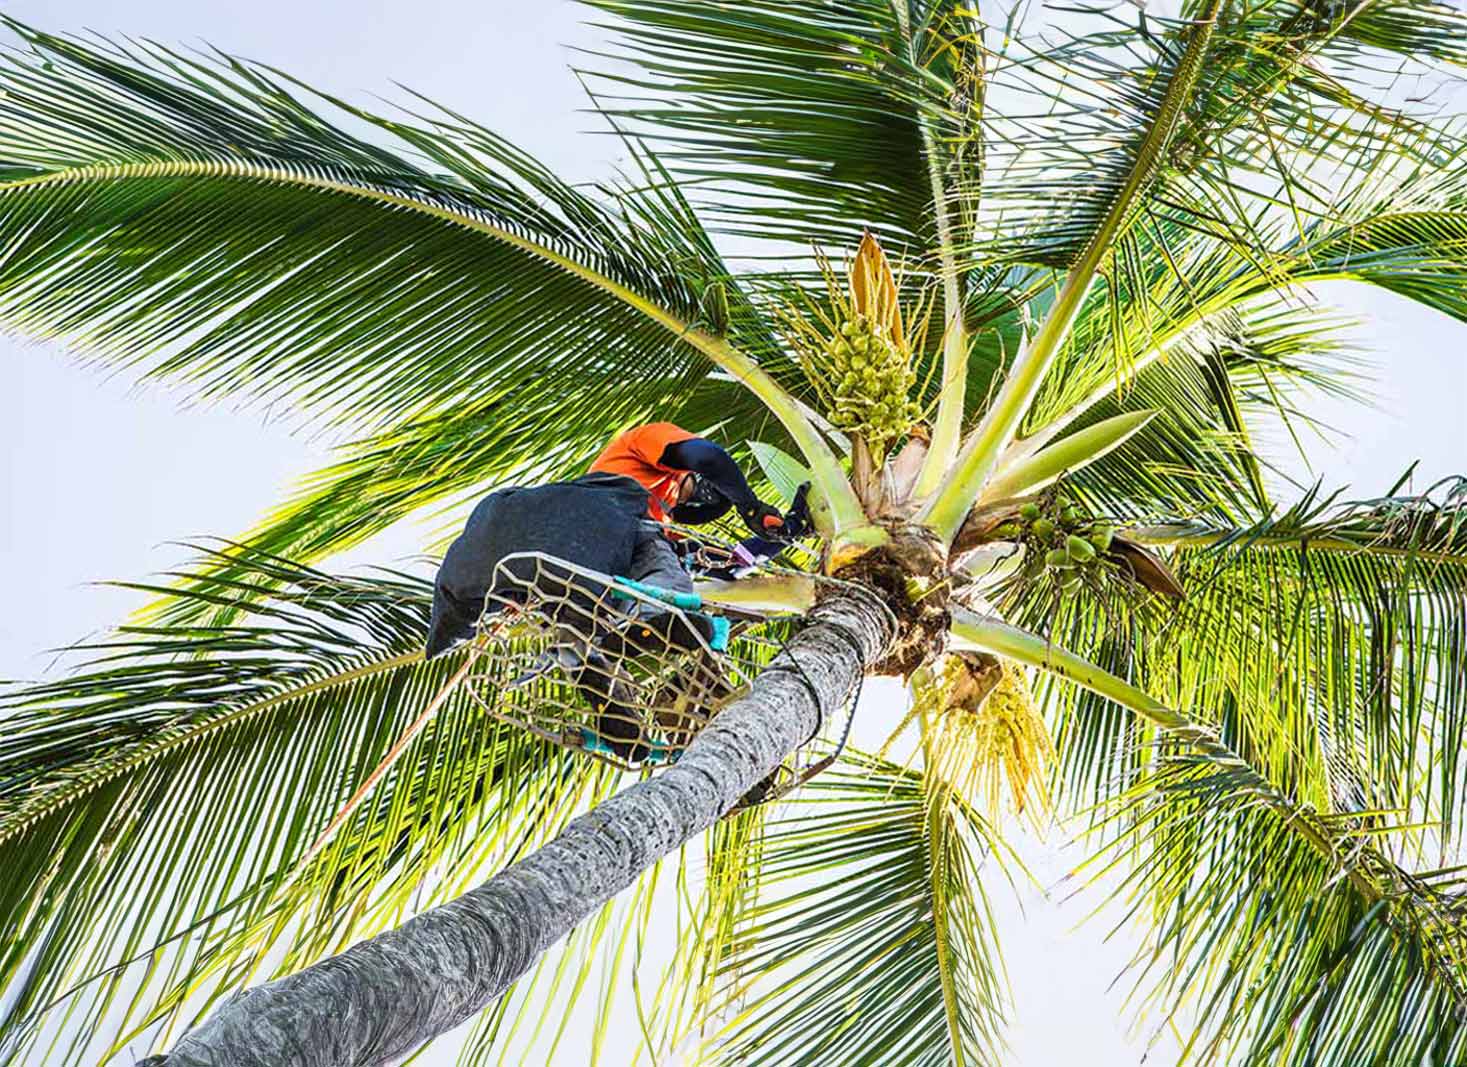 Finding a reputable palm tree trimming service in Hawaii